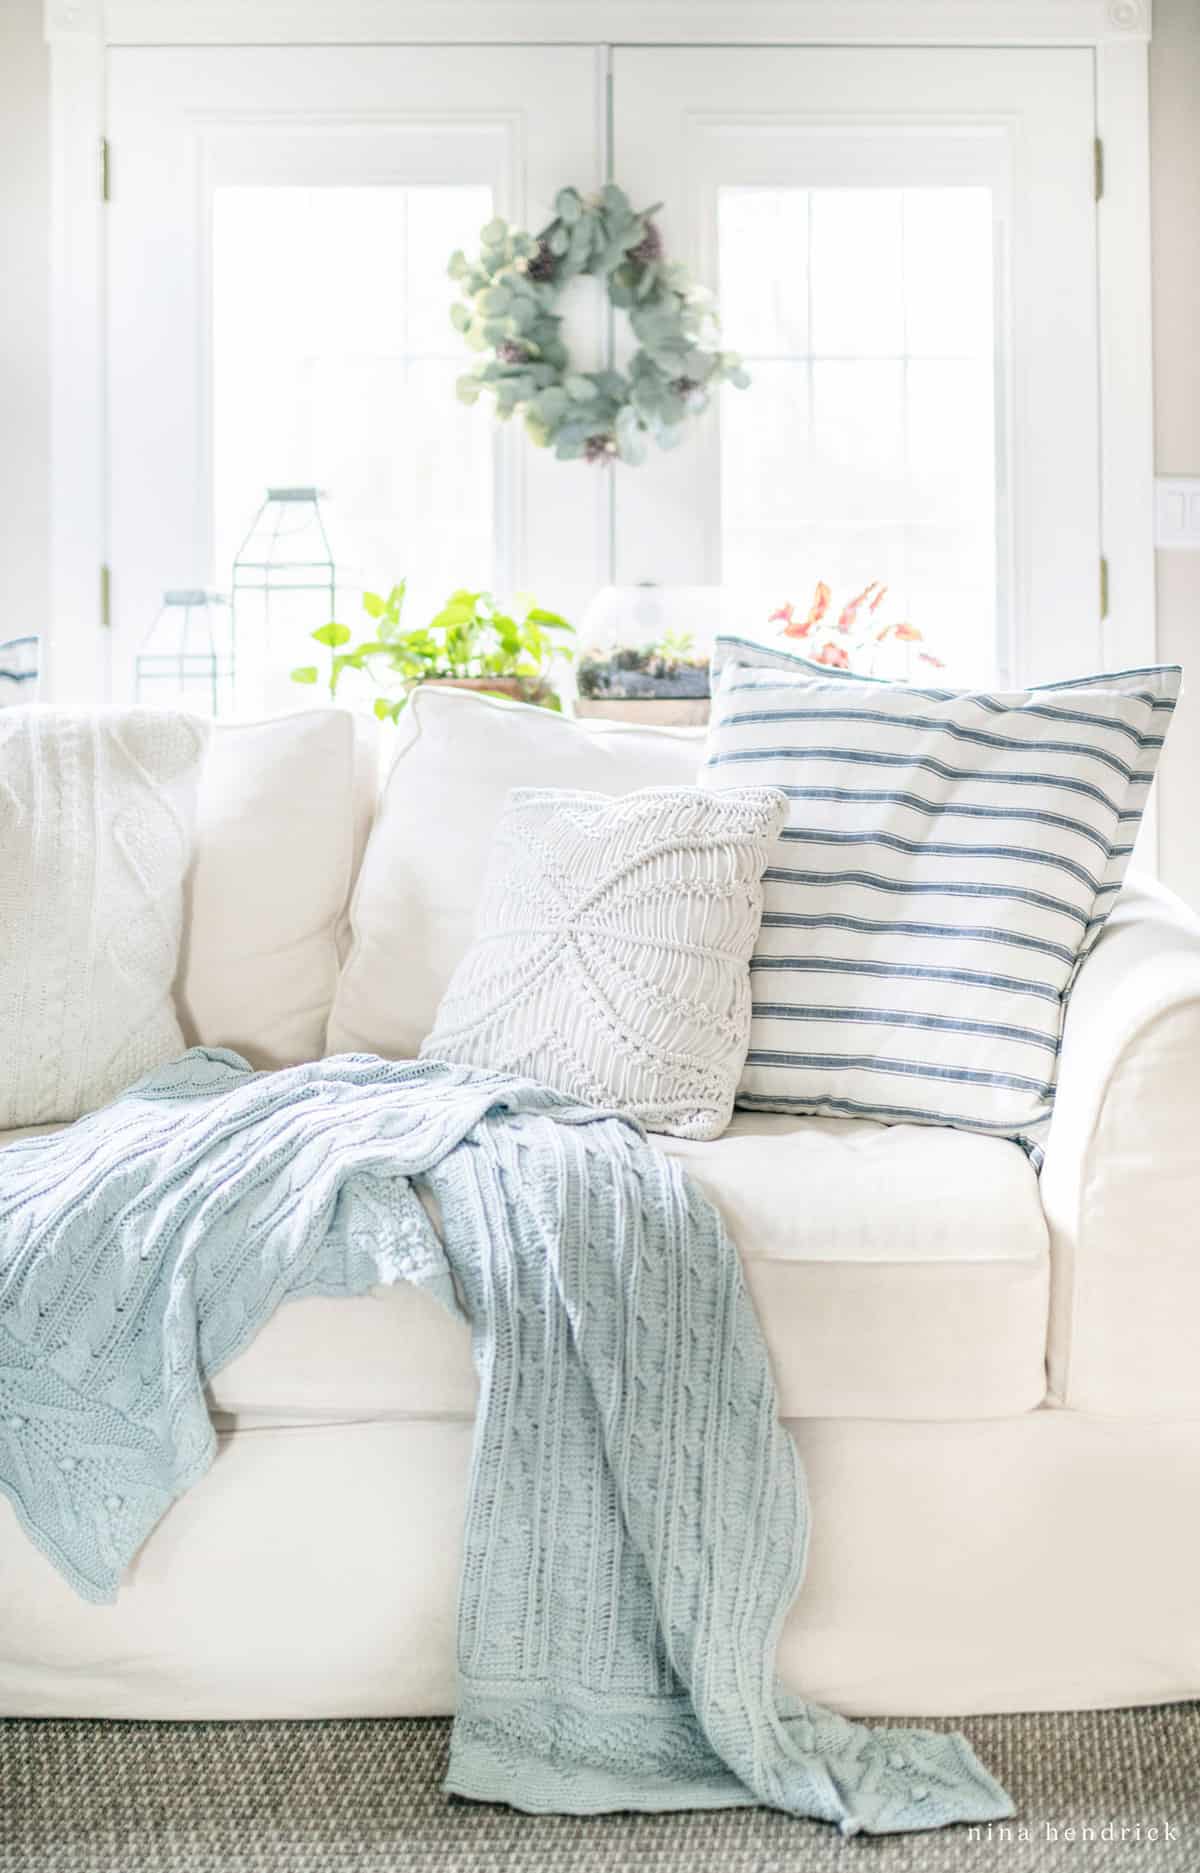 Clean, white slipcovered sofa with white throw pillows and blue accents.